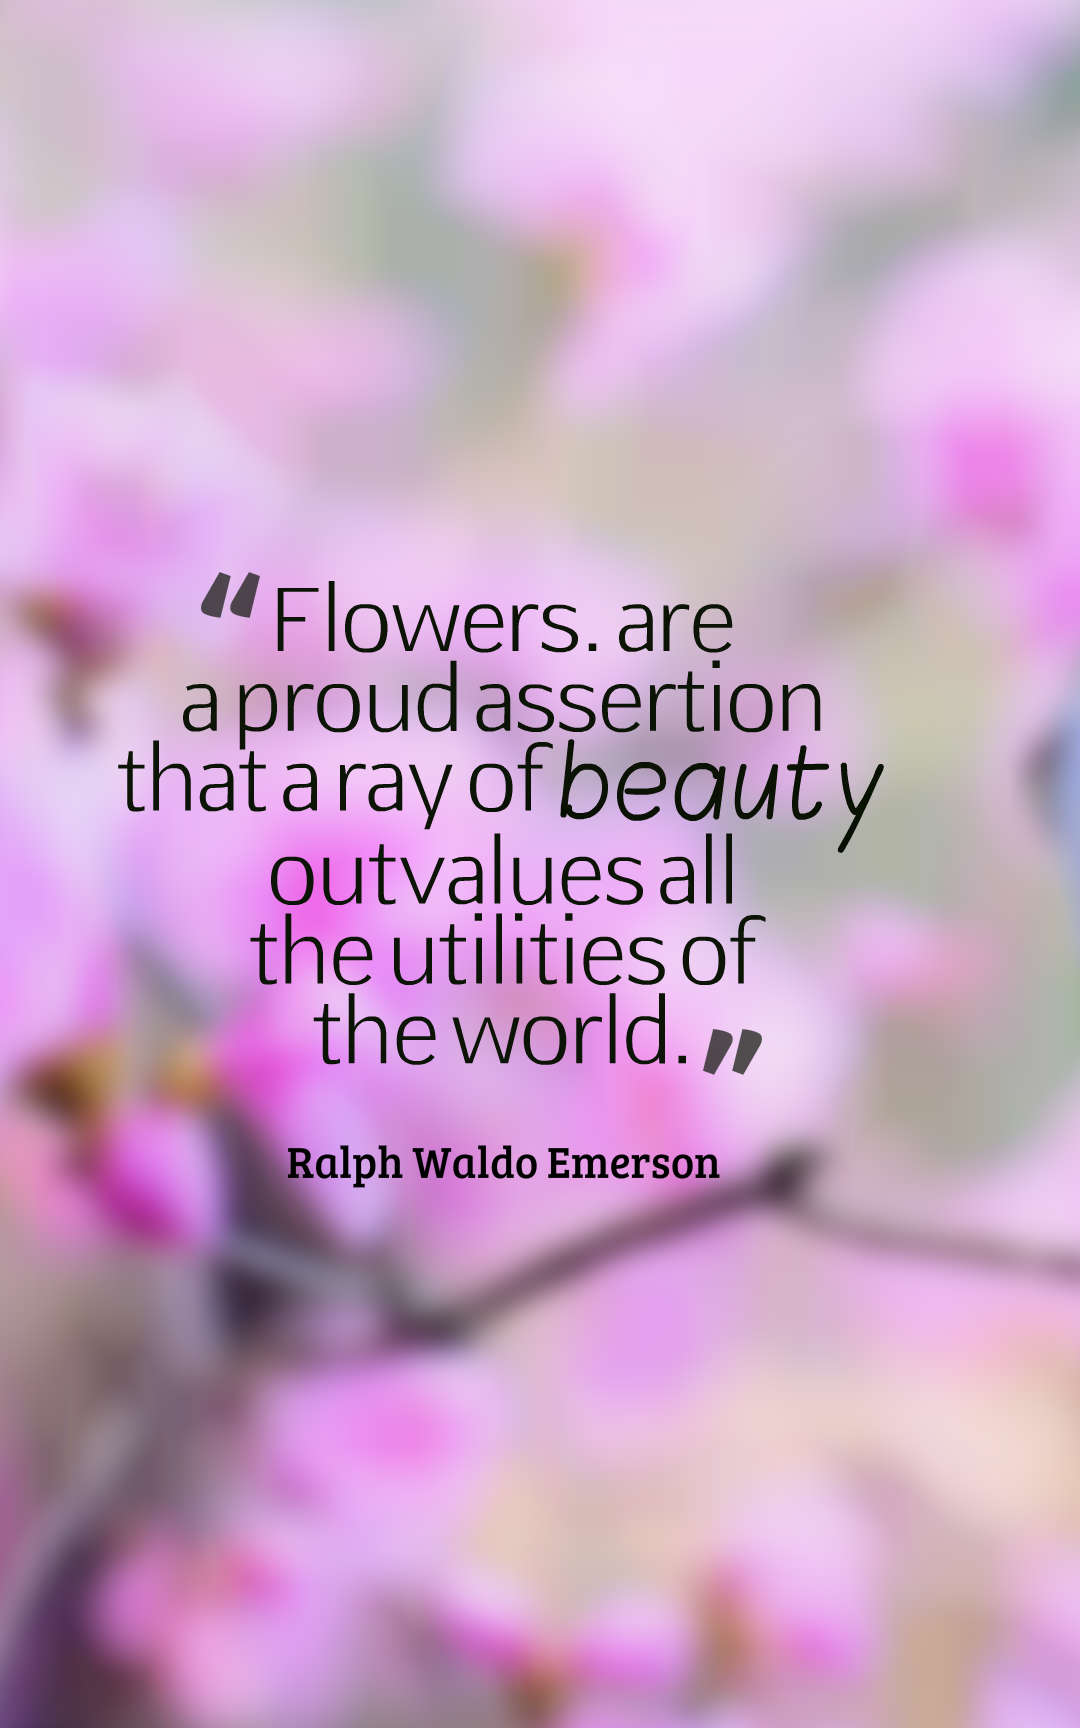 Flowers... are a proud assertion that a ray of beauty outvalues all the utilities of the world.